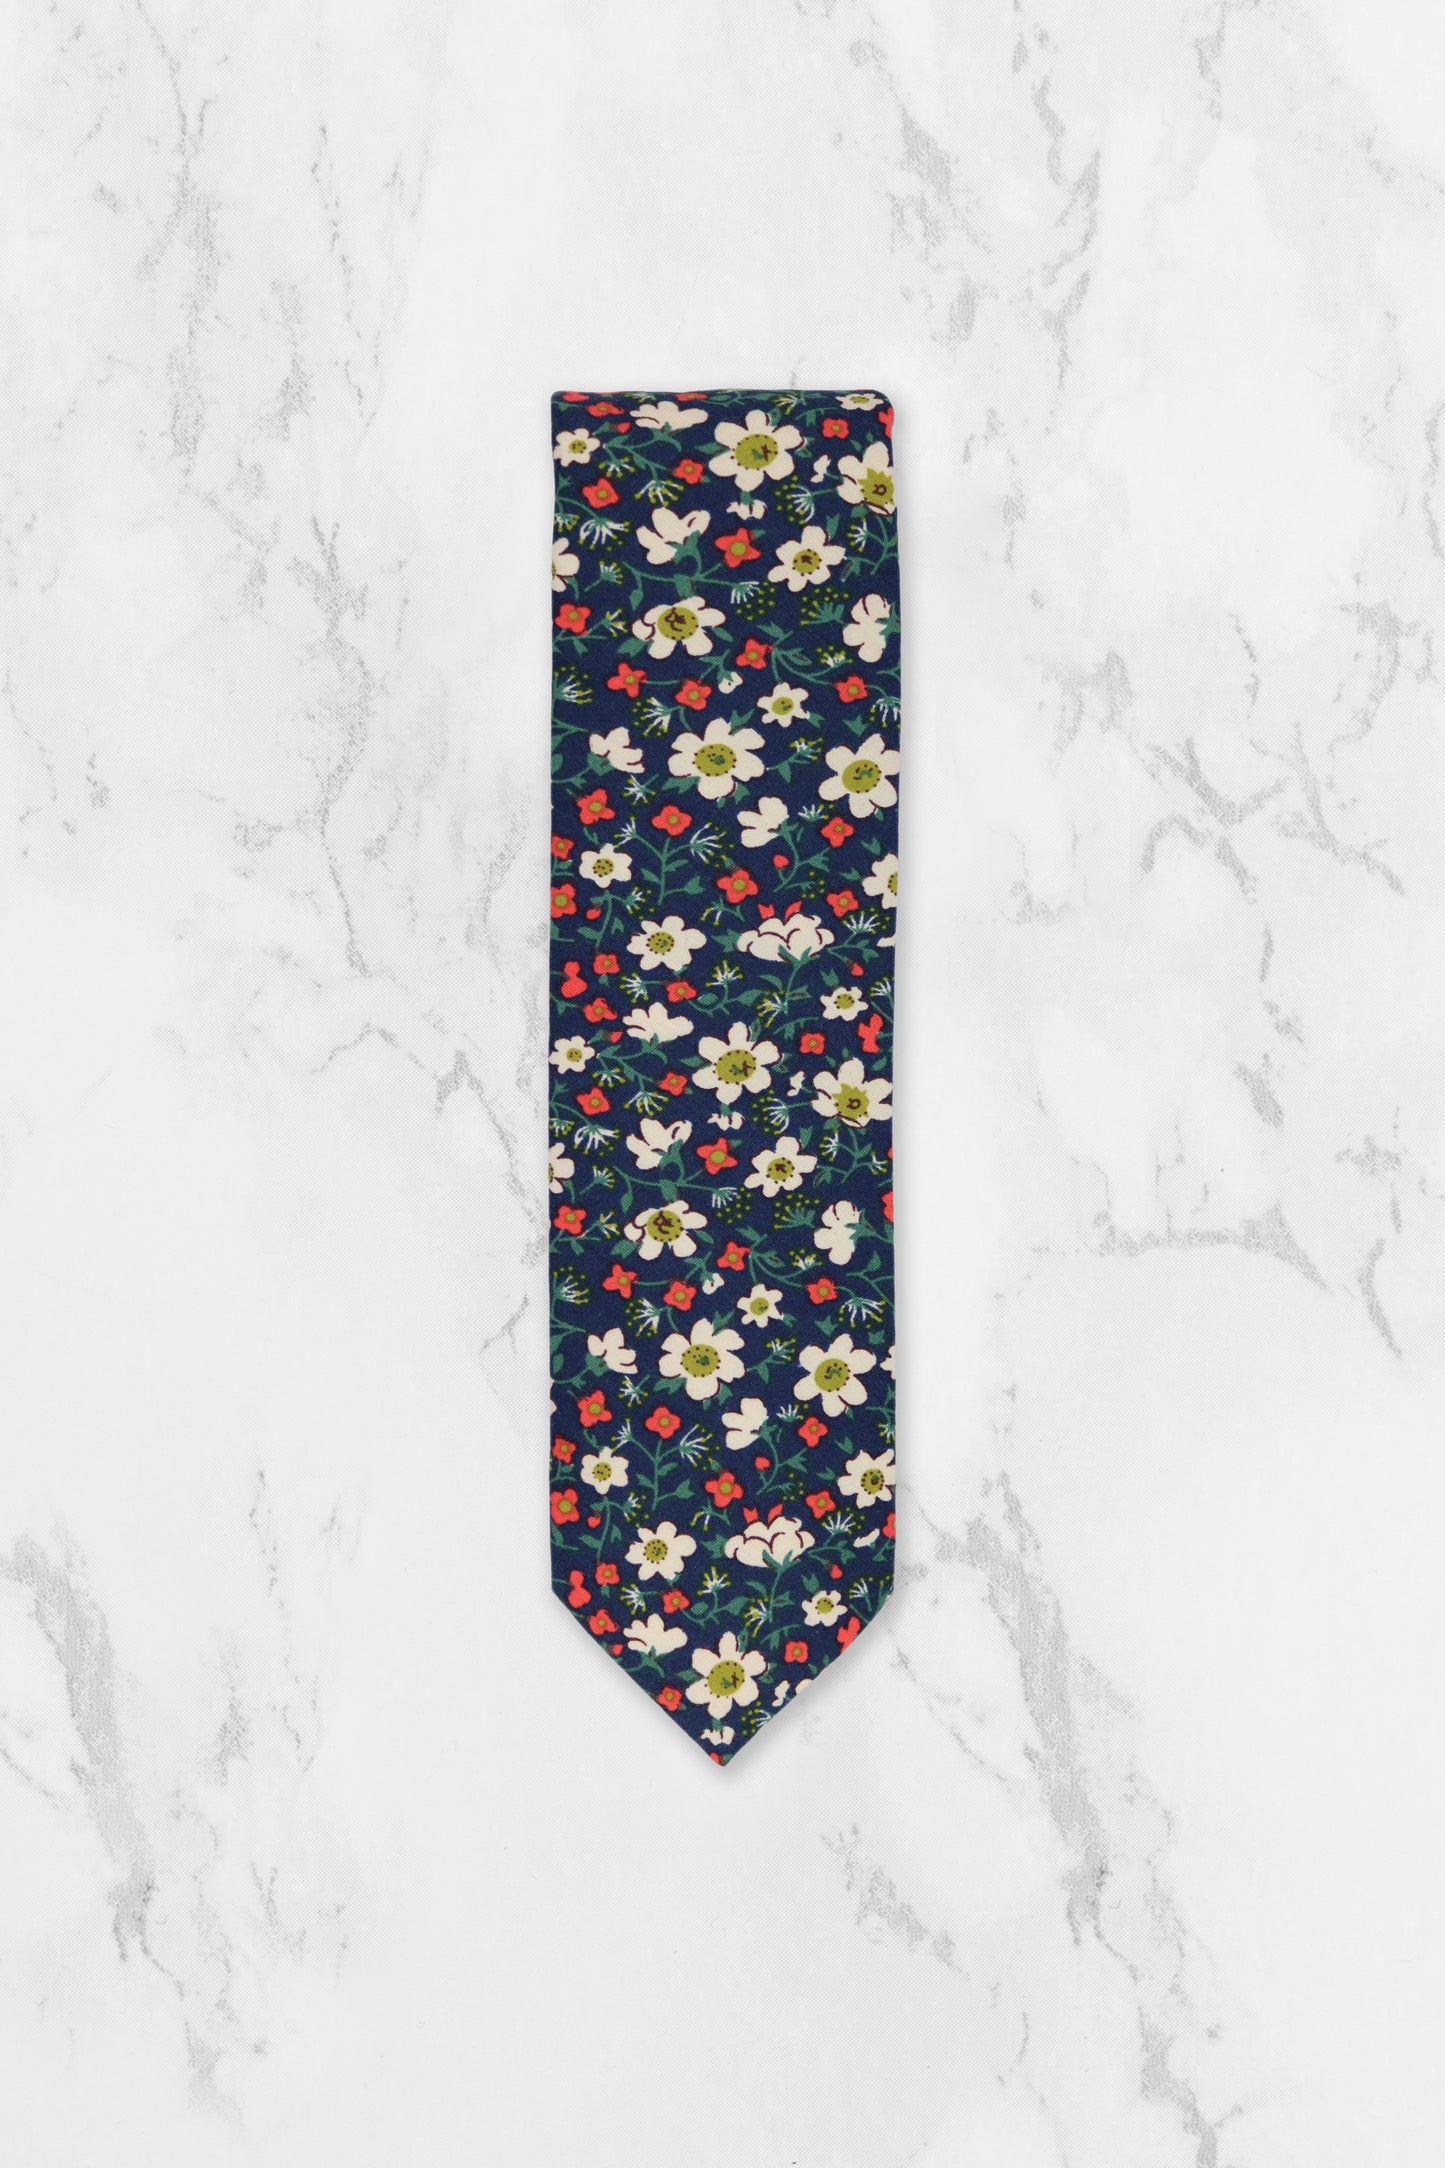 100% Cotton Floral Print Tie - Navy Blue, White & Red